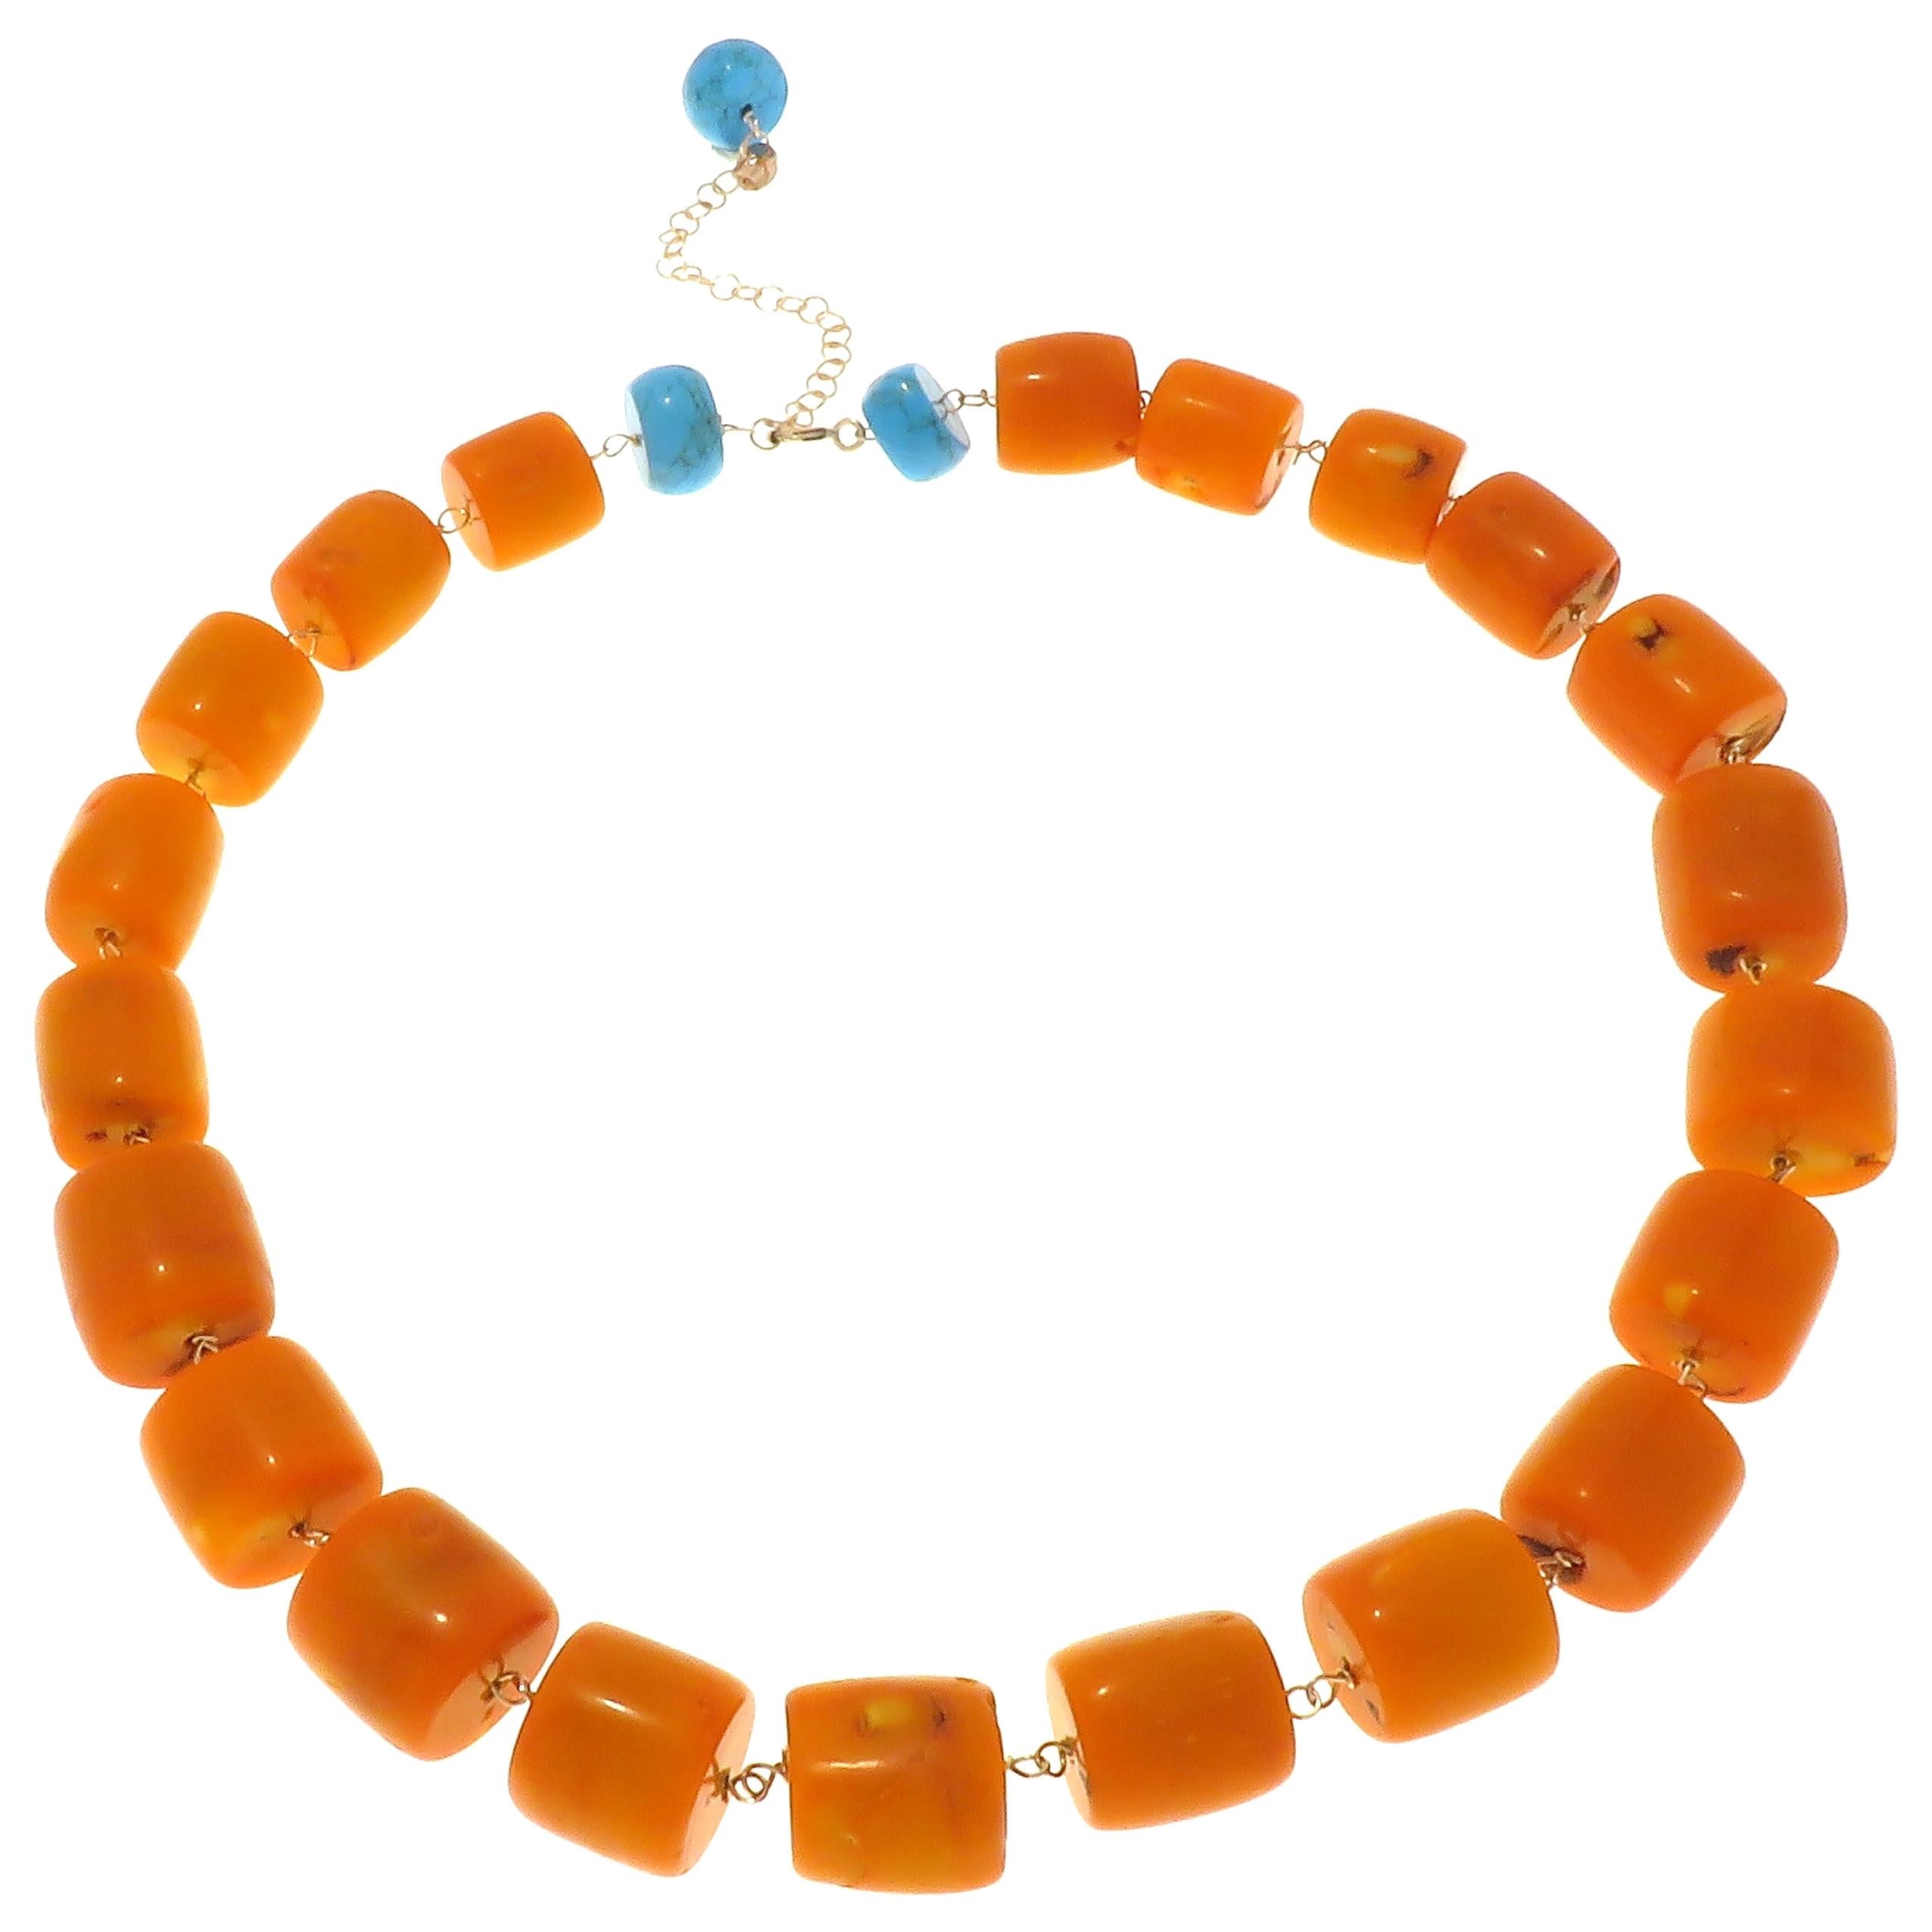 Vivid Orange Stones Turquoise 9 Karat Rose Gold Necklace Handcrafted in Italy